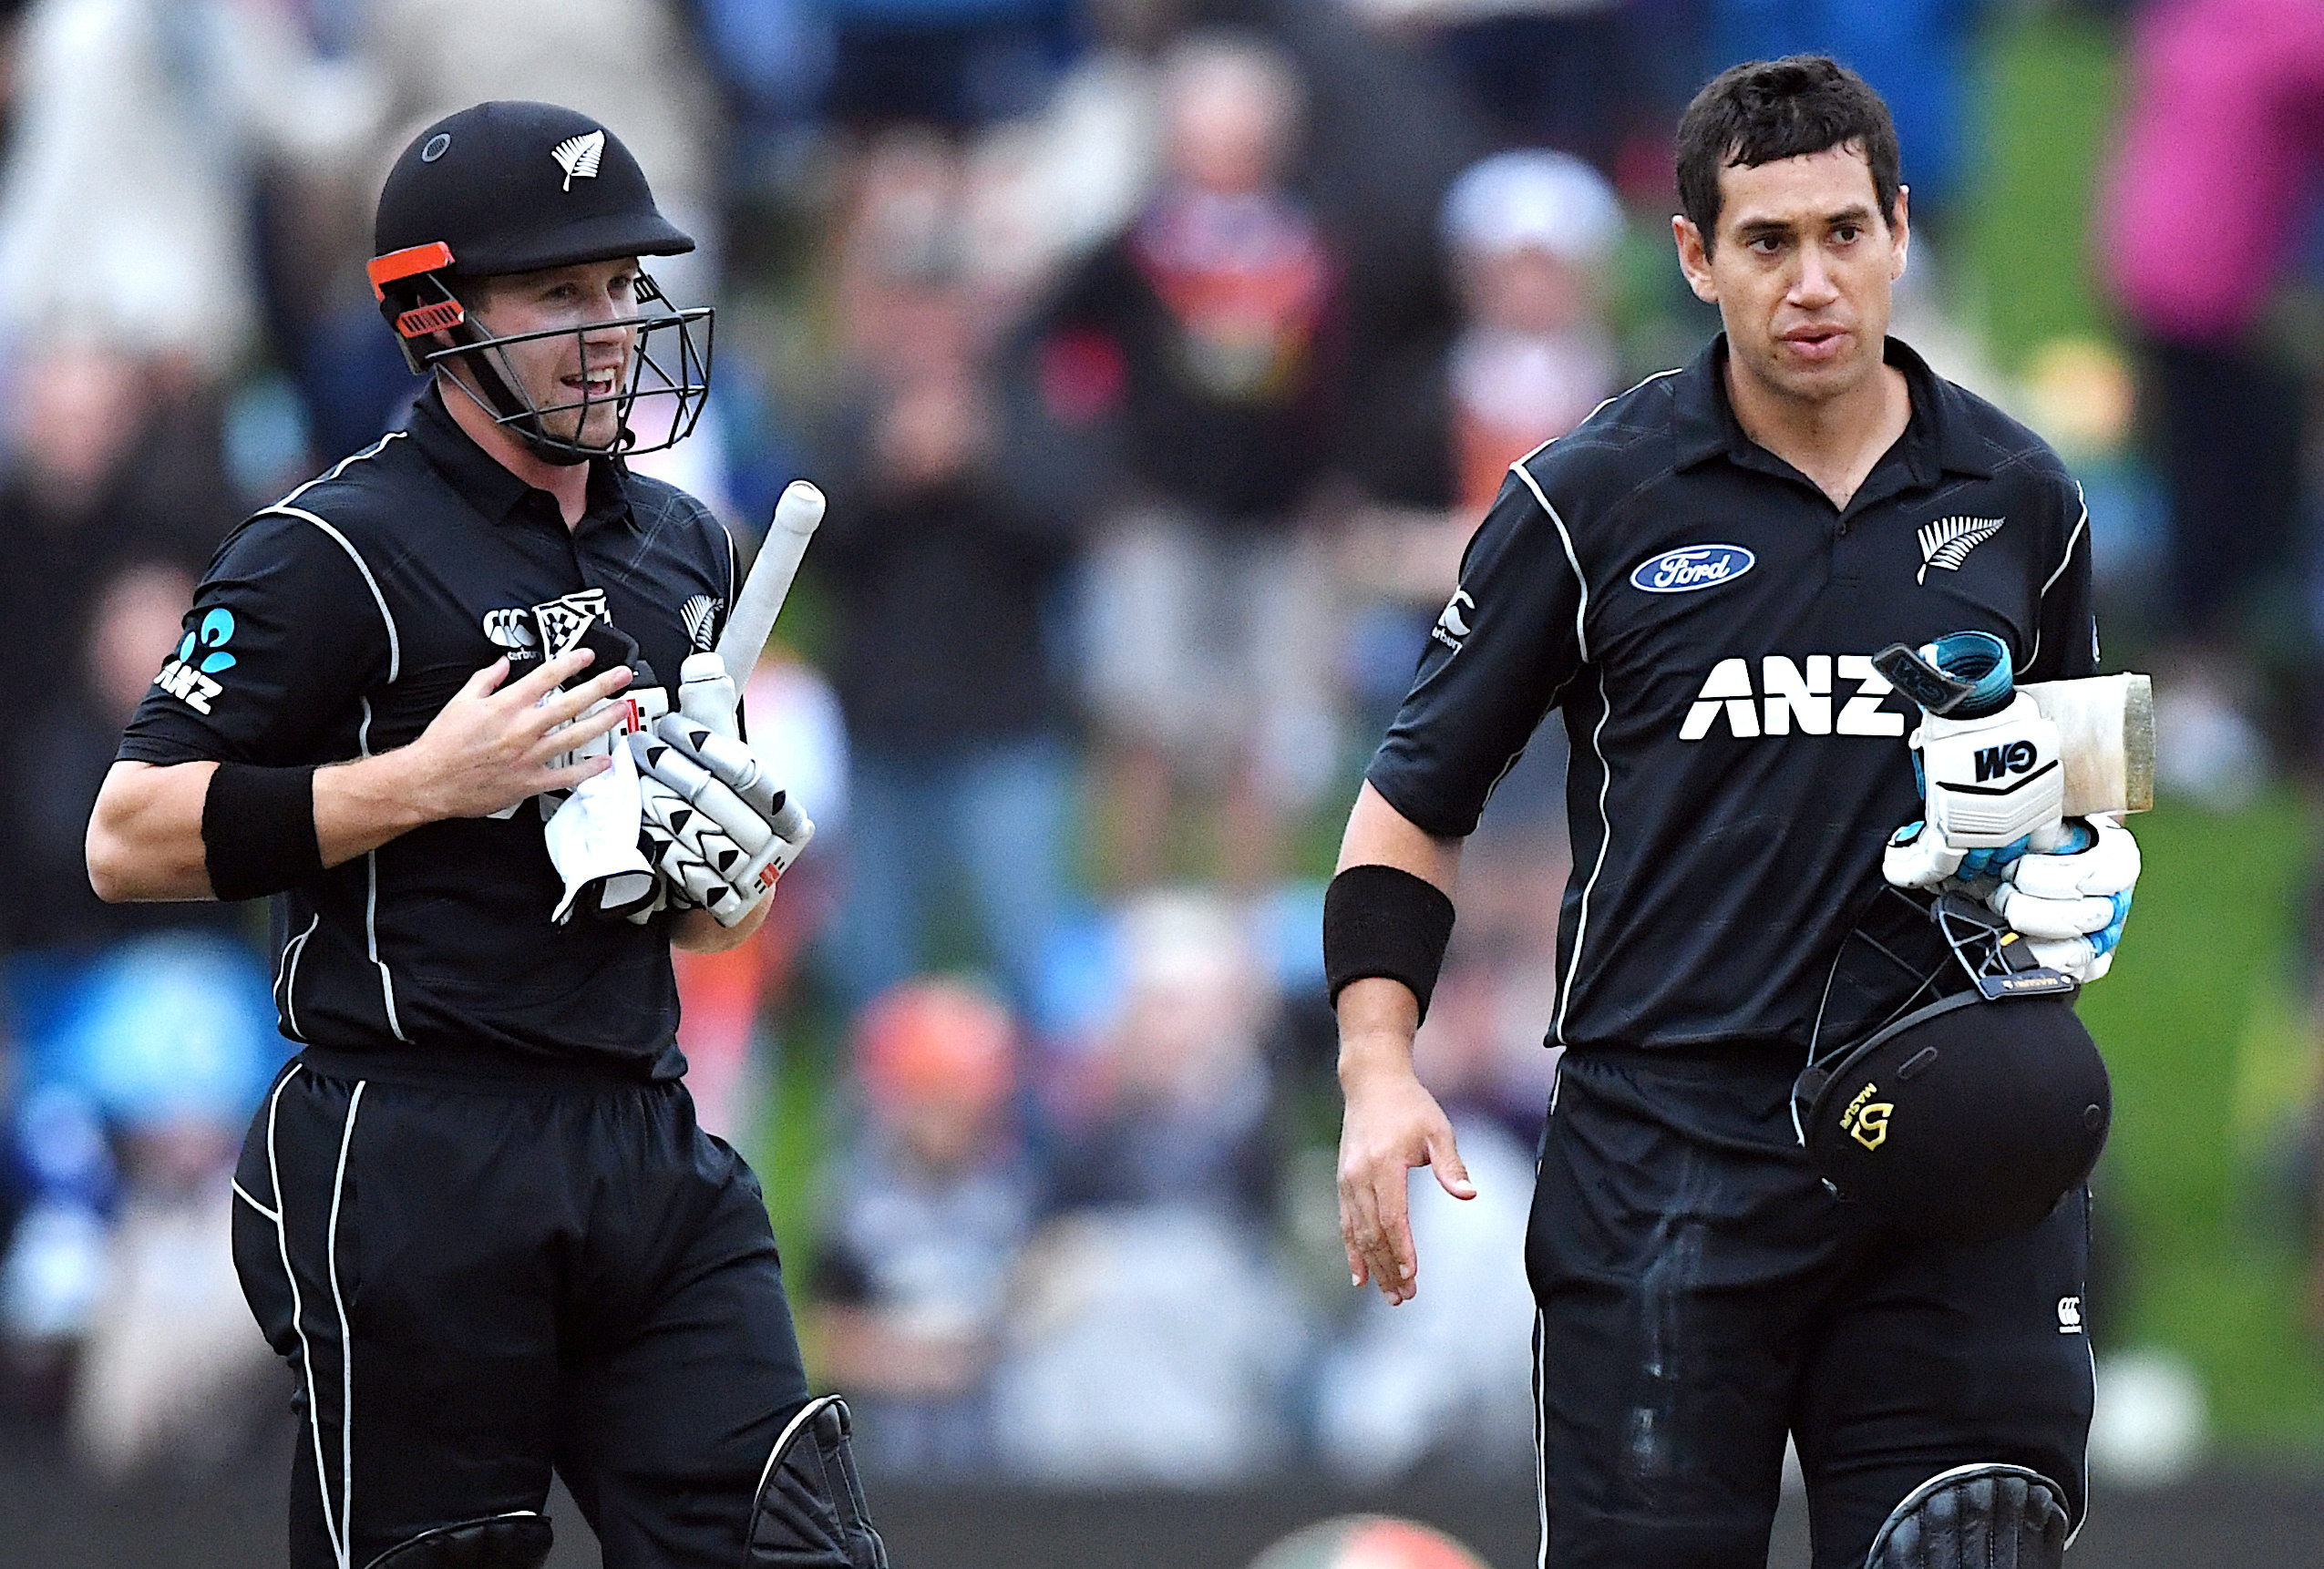 Cricket: Taylor guides New Zealand to thrilling win over England